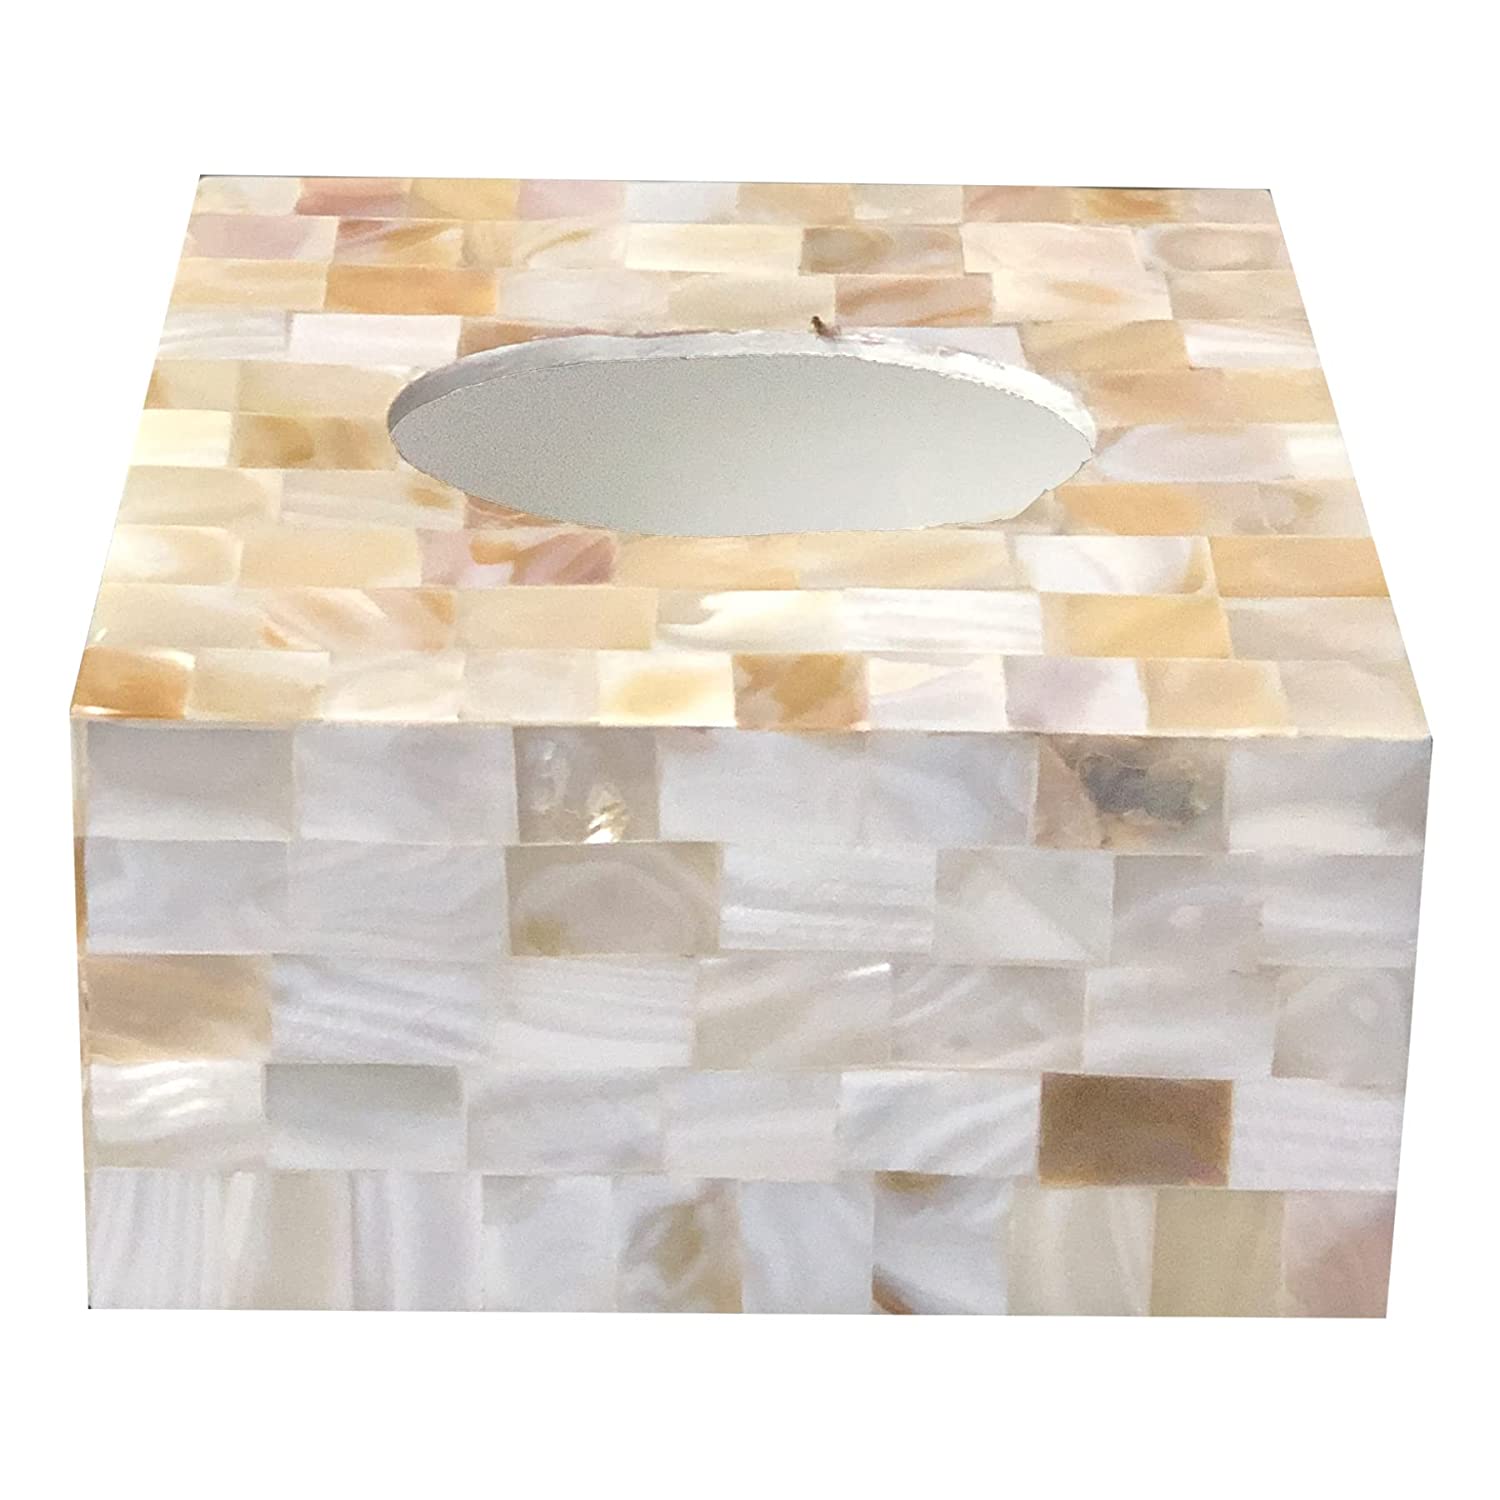 Handcrafted Mother of Pearl Wooden Tissue Box Holder for Home and car, Tissue Dispenser for Bathroom, Square Tissue Box Holder for Dining Table, Housewarming Gift Ideas (Ivory) 